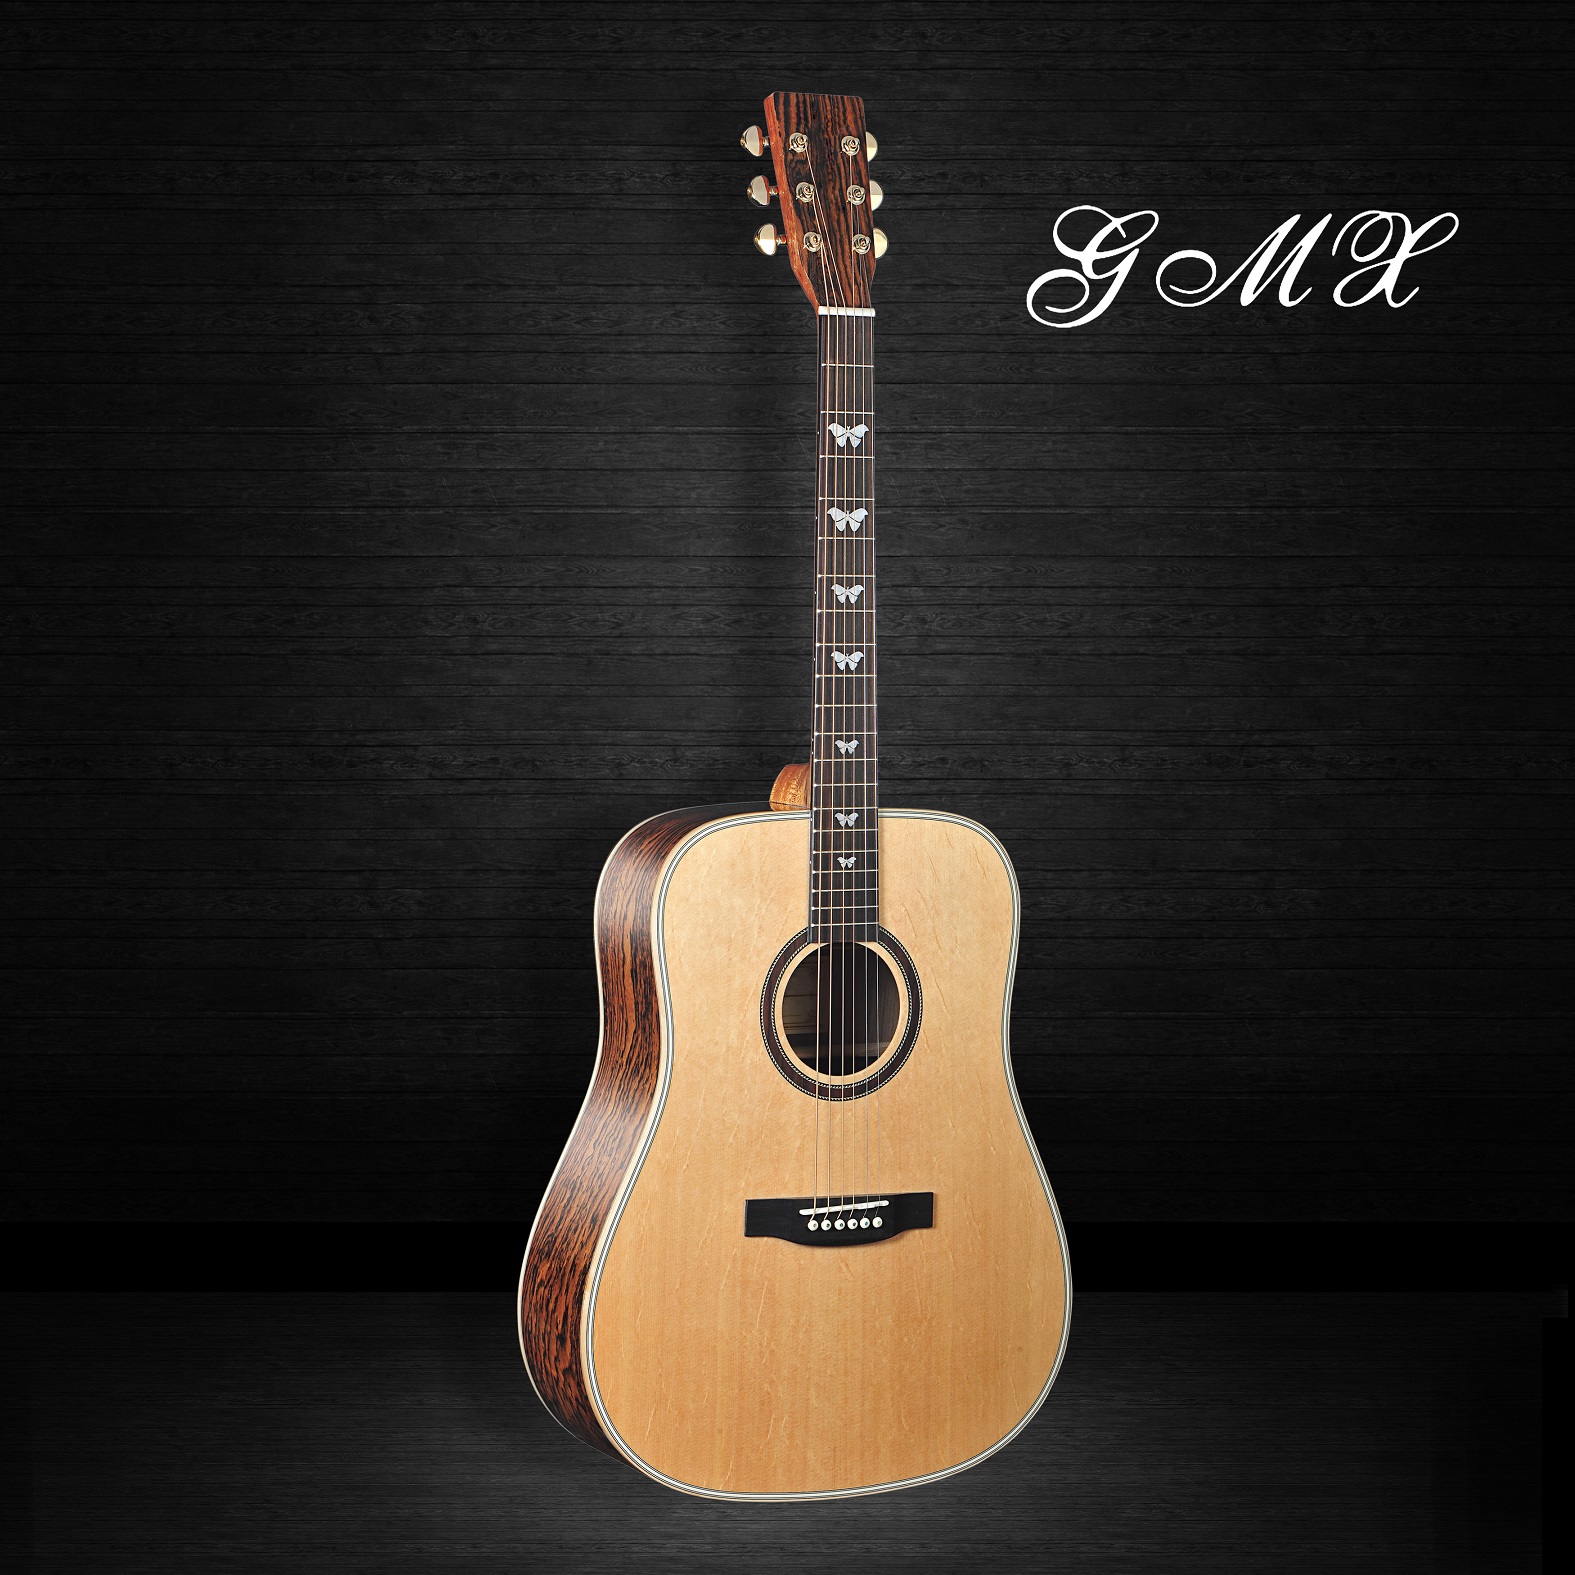 Cheap import guitars acoustic guitar of 41inch